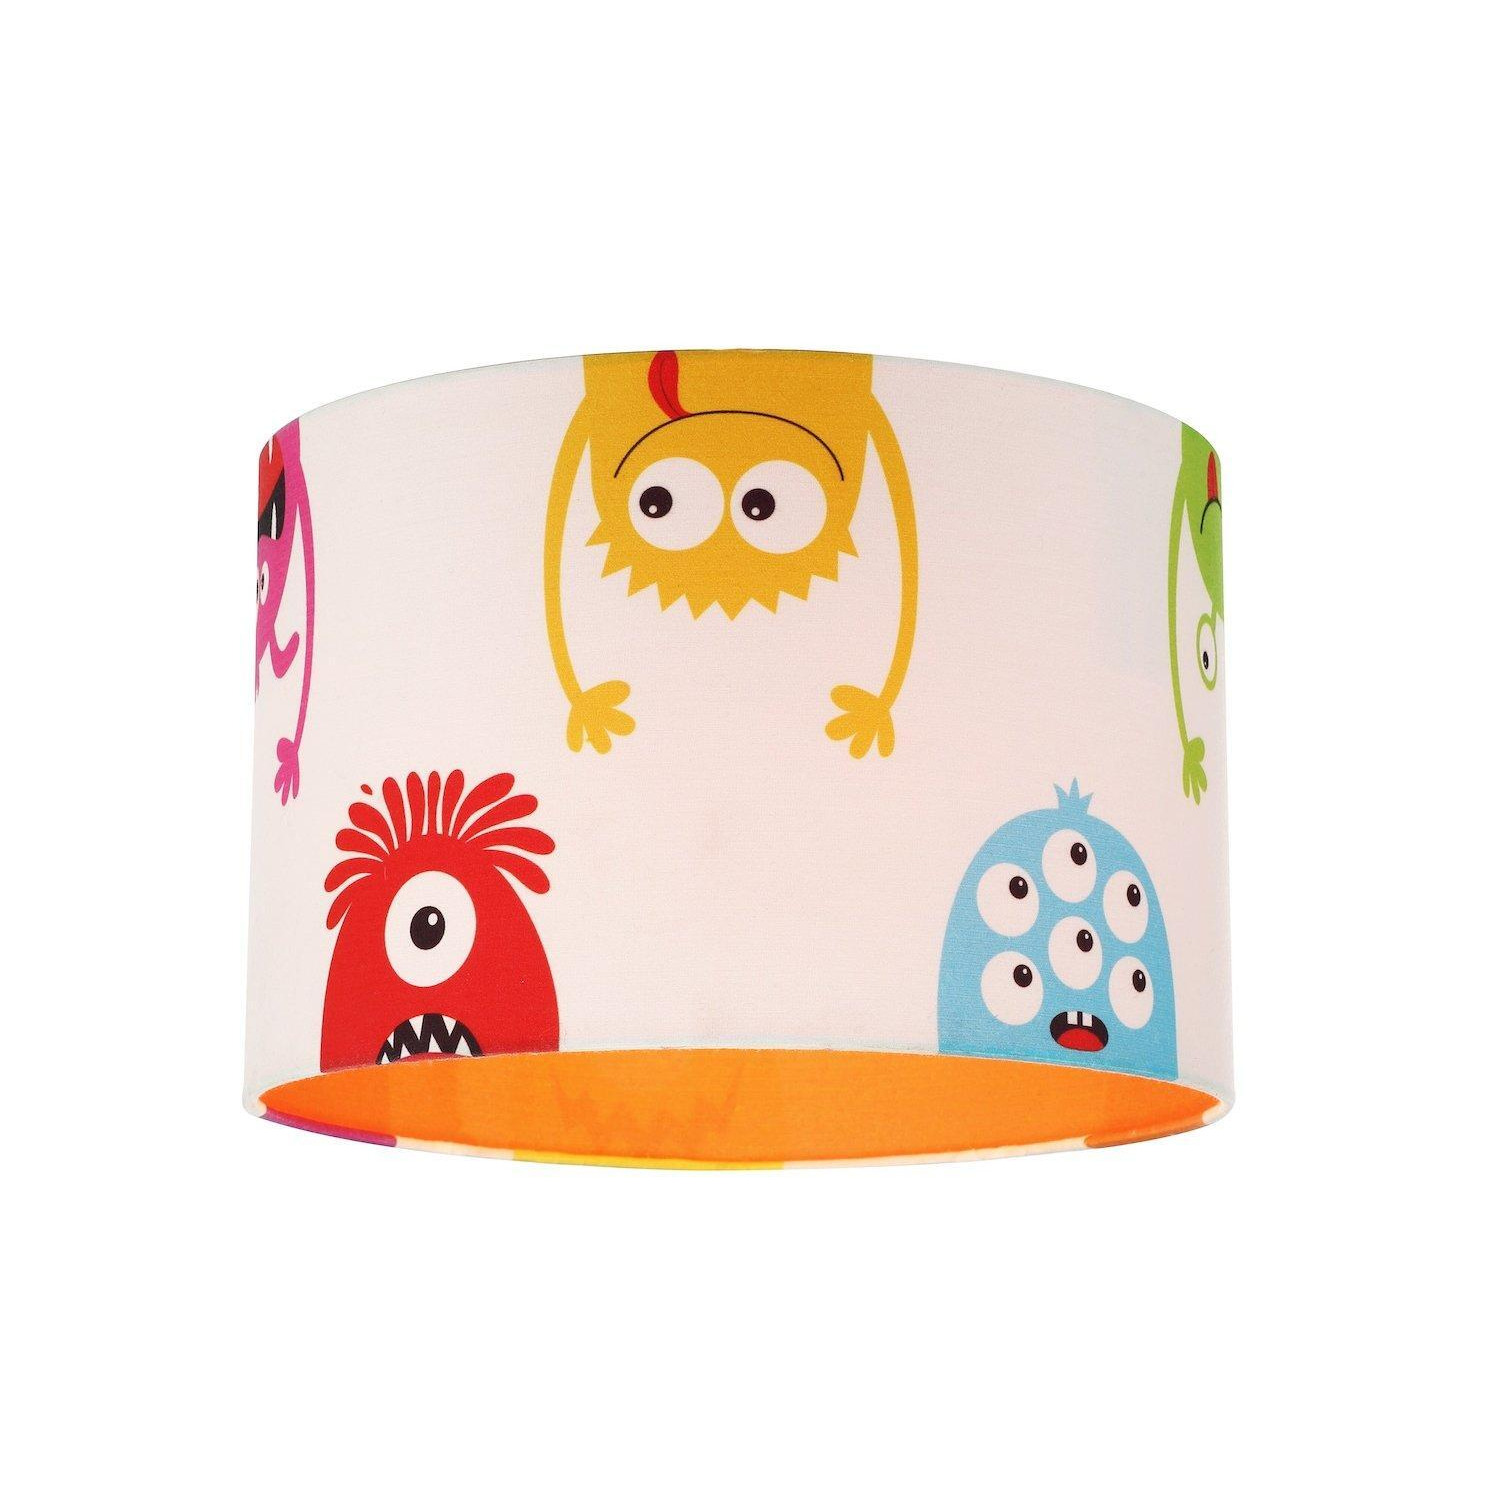 Funny Monsters Children's Lamp Shade with Cotton Inner and Multi Colour Monsters - image 1